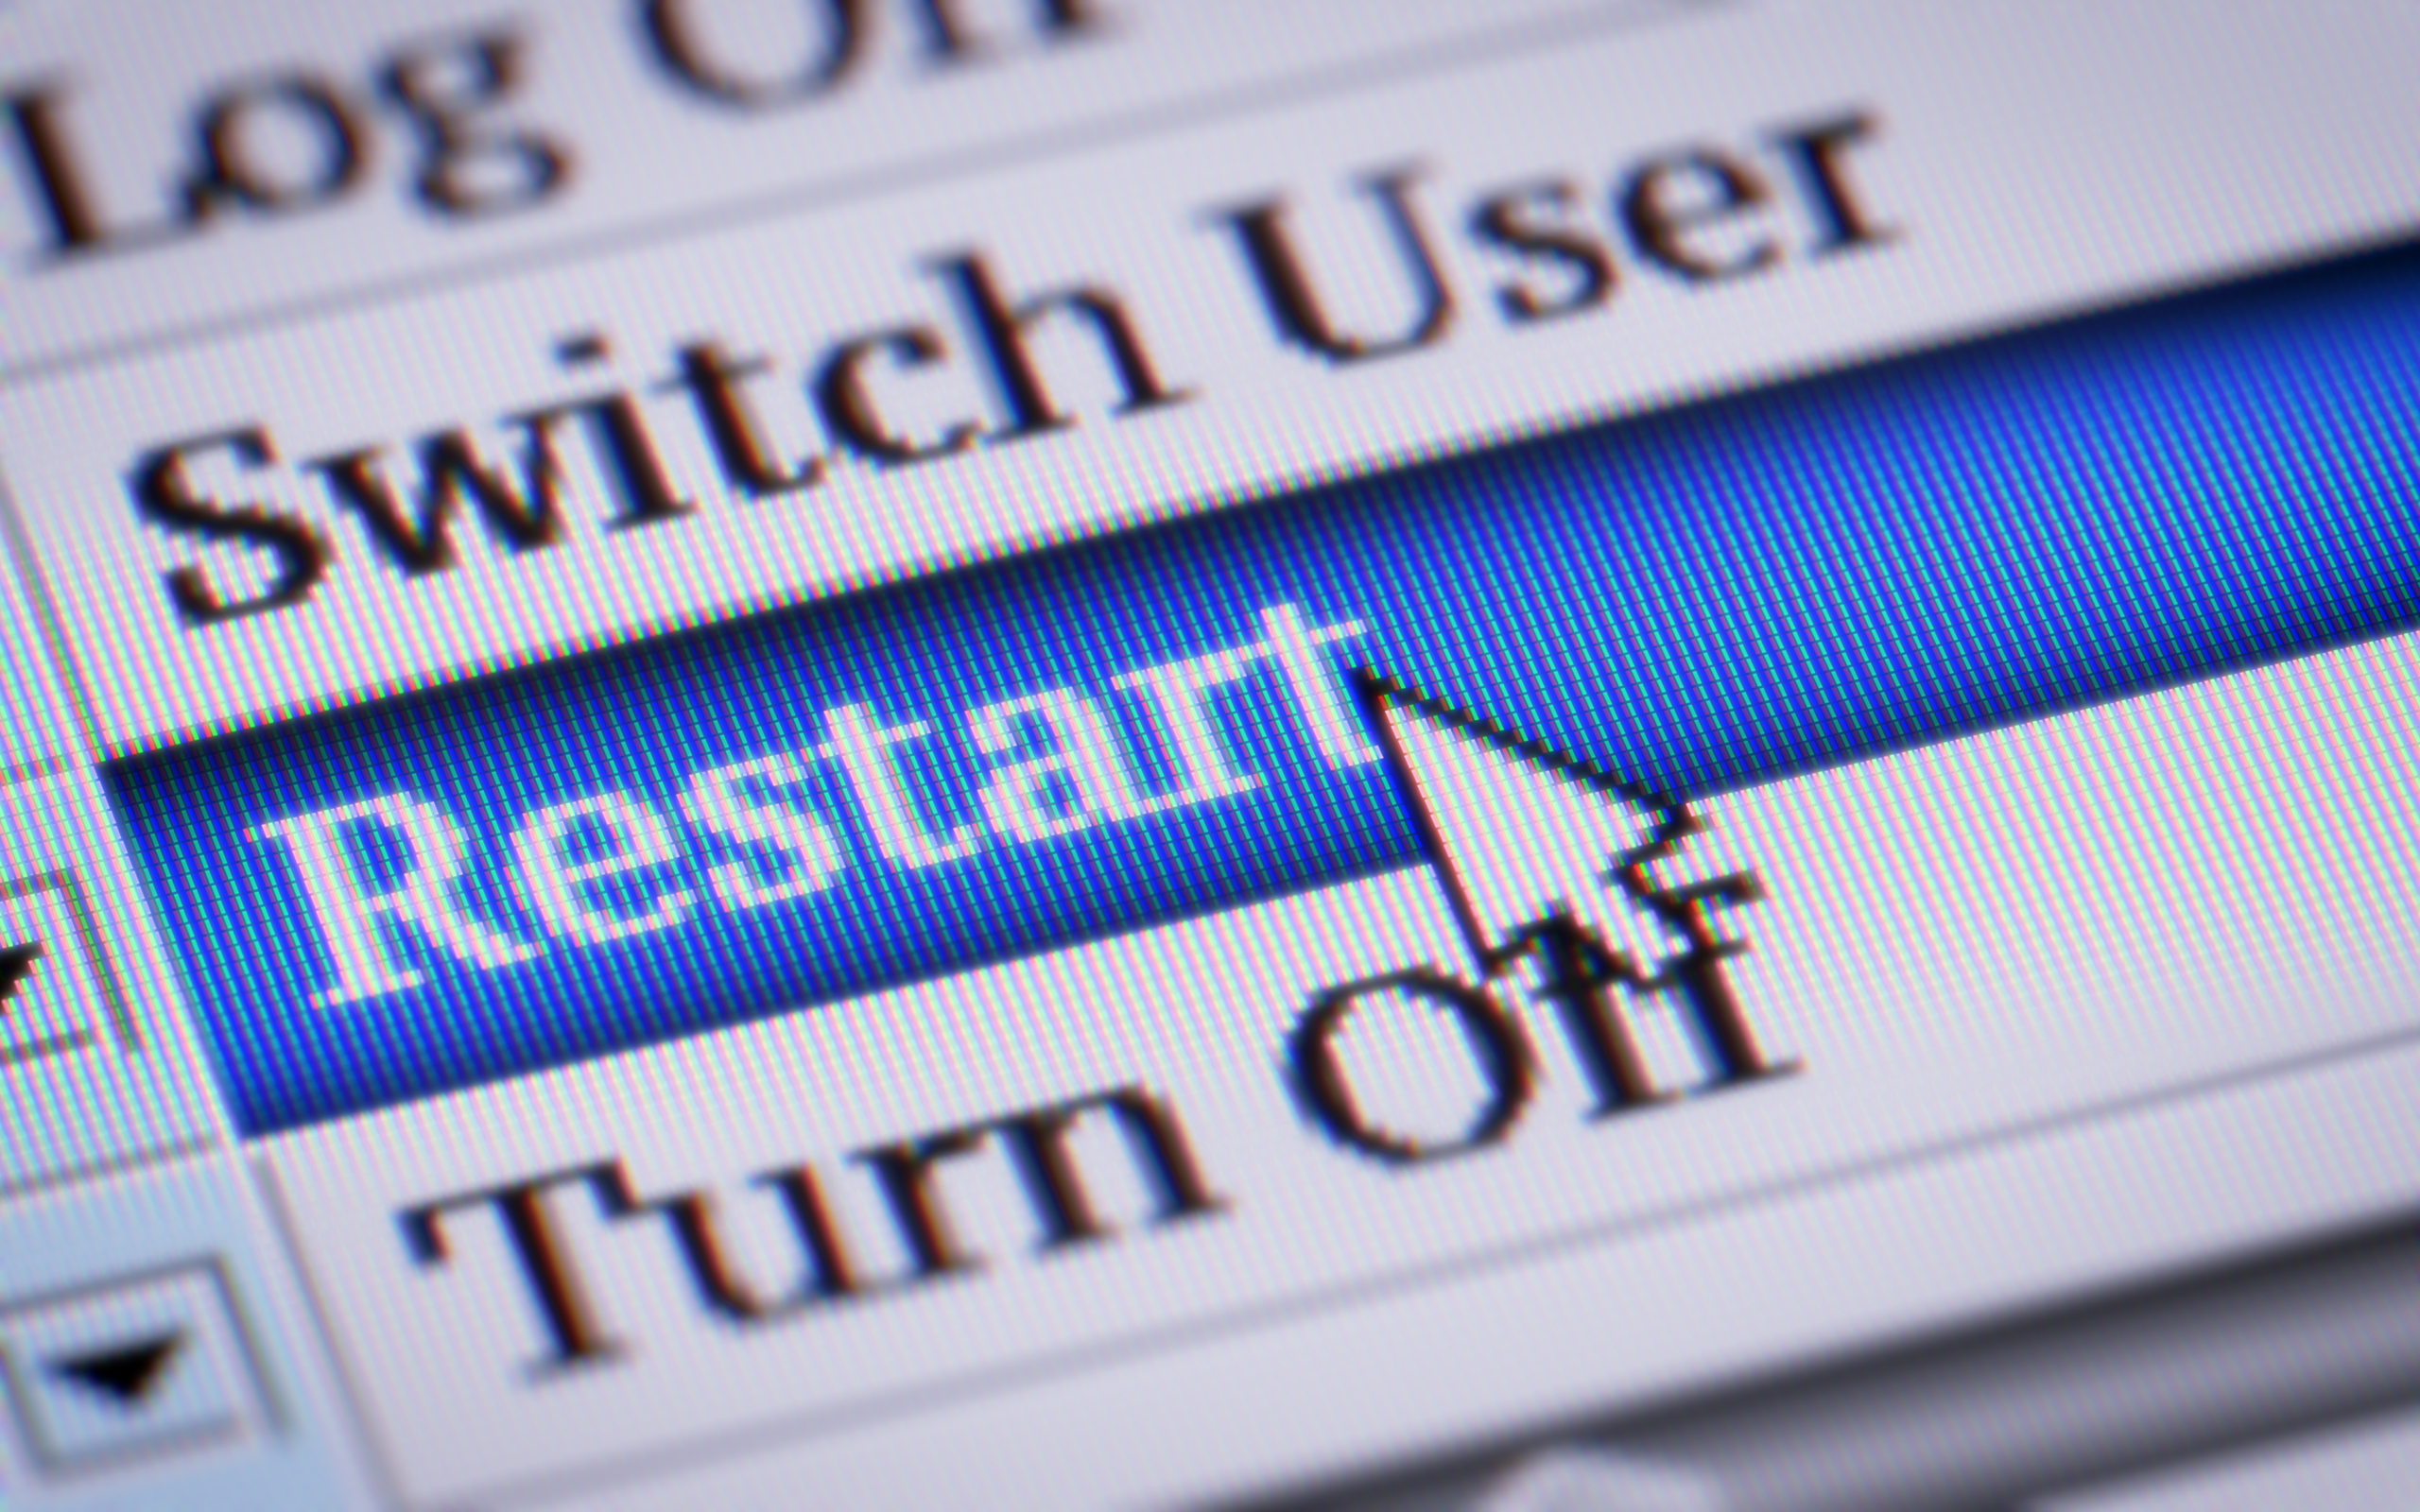 A computer cursor hovers over the Restart option.